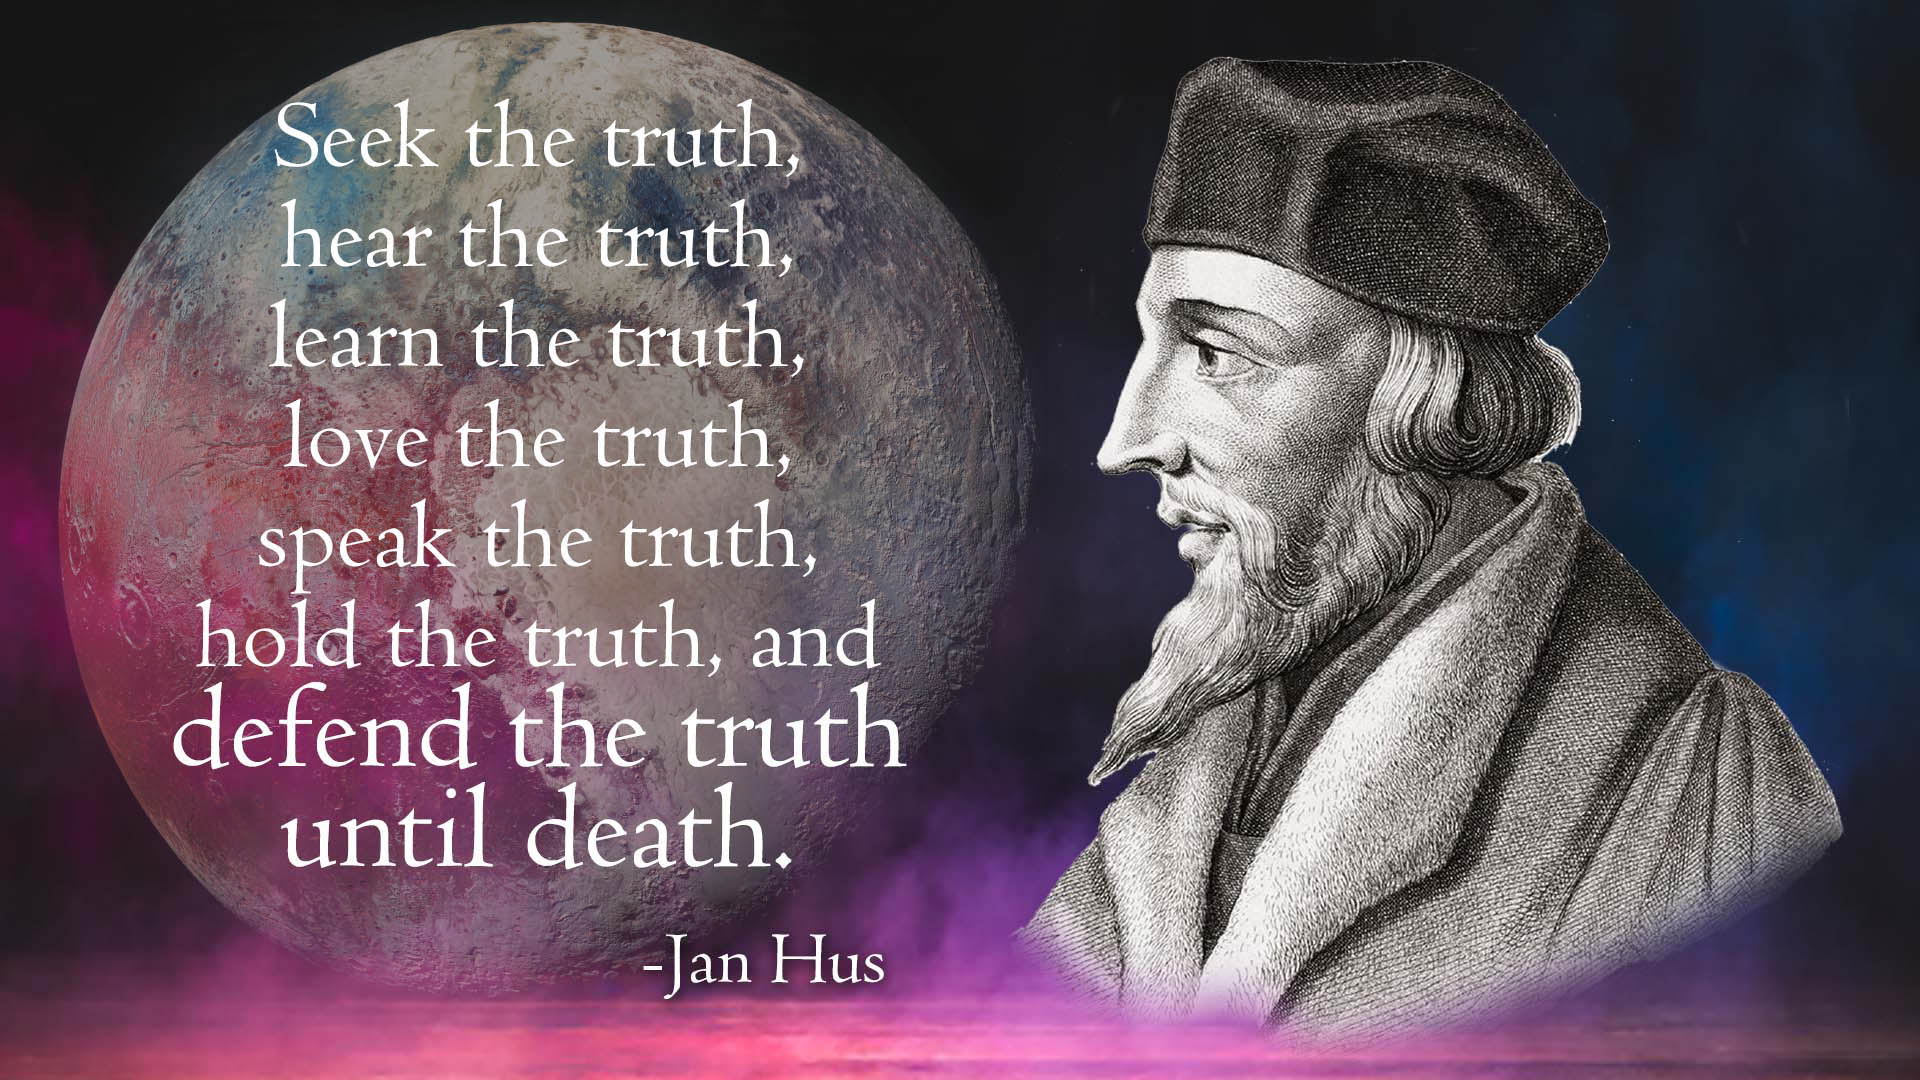 Jan Hus, Critical Thinking, and Pluto